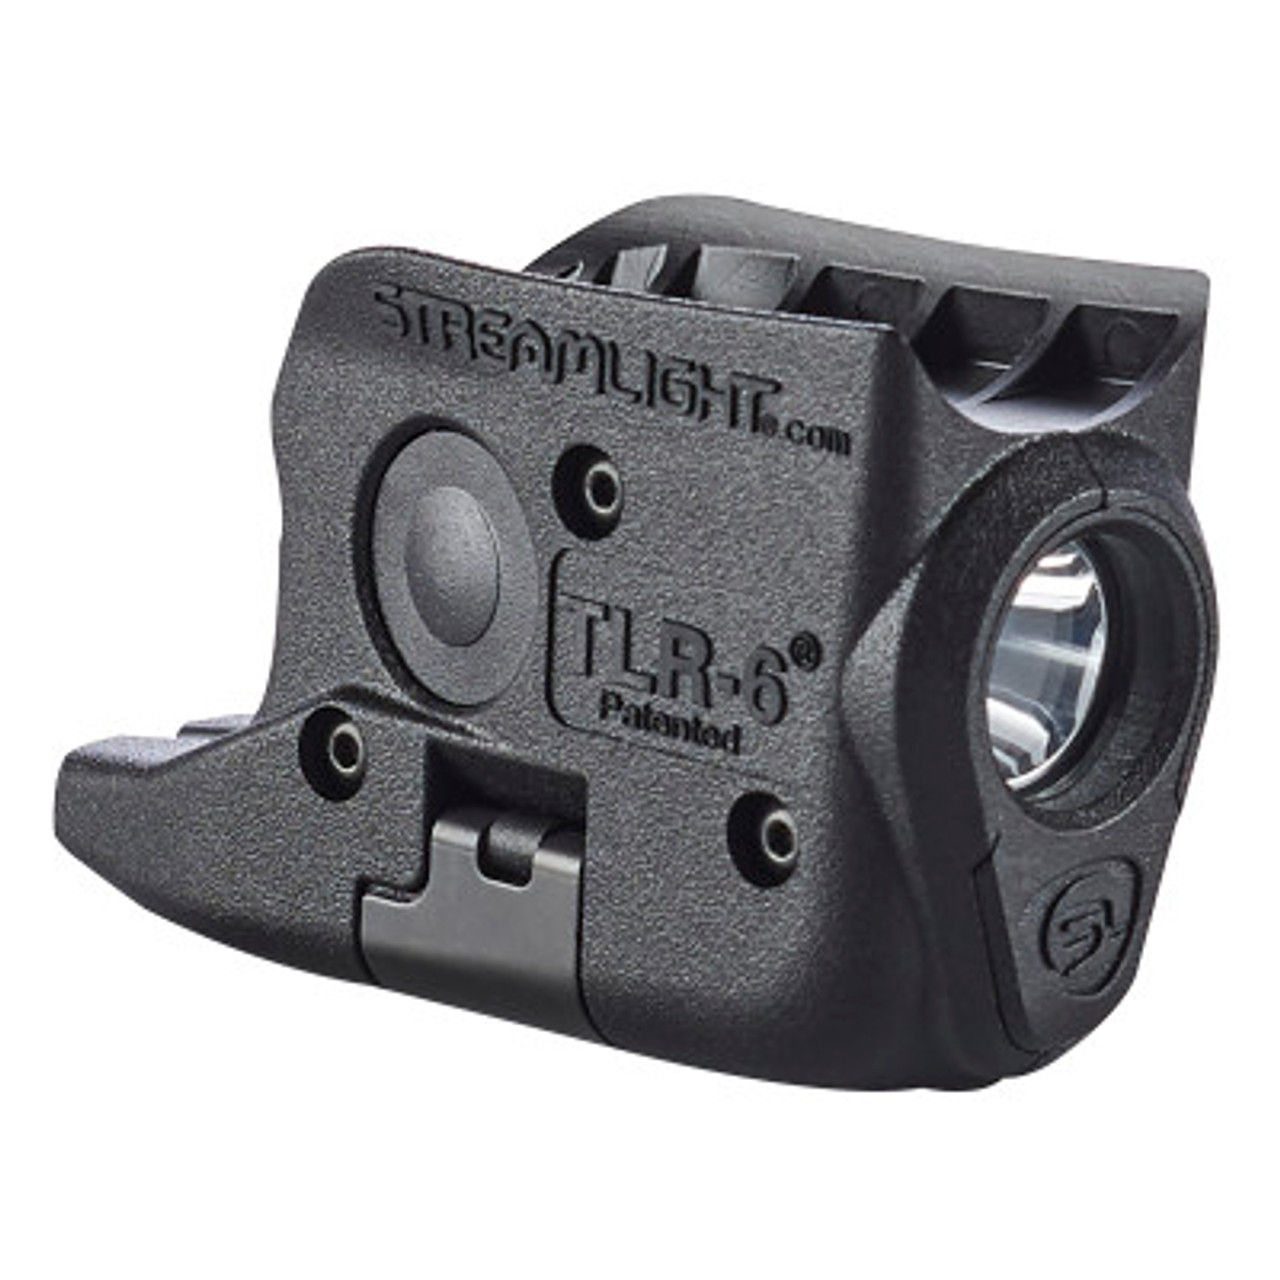 Streamlight 69293 TLR-6 Rail (Smith & Wesson M&P) with white LED and red laser. Includes two CR 1/3N lithium batteries, Black - DSS